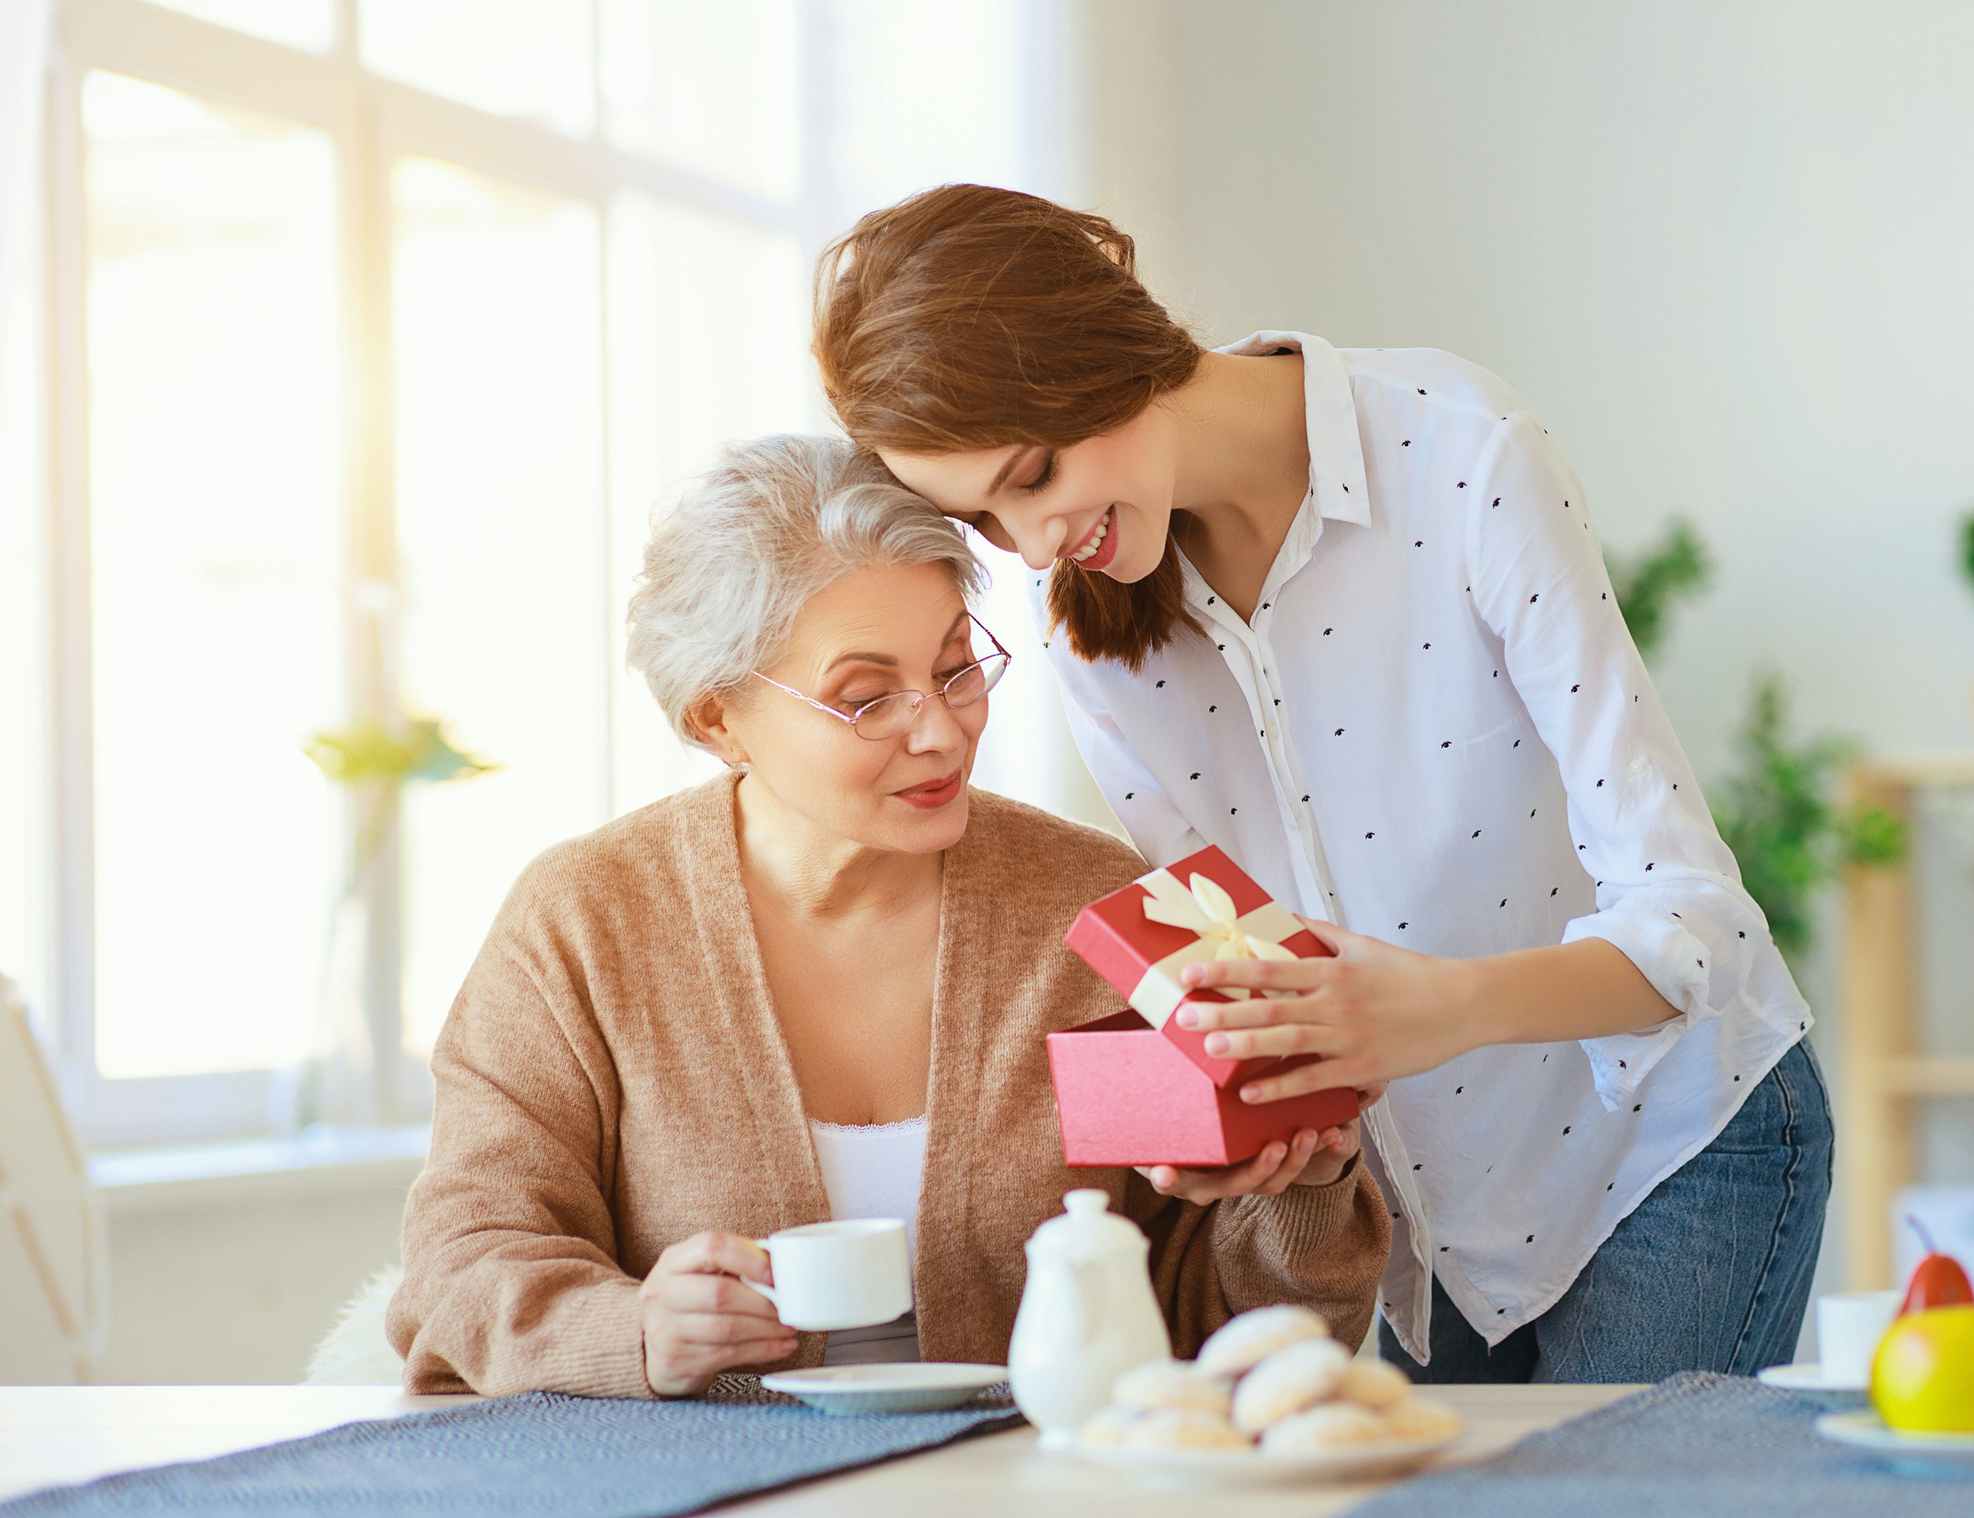 Young female opening a gift for elderly female